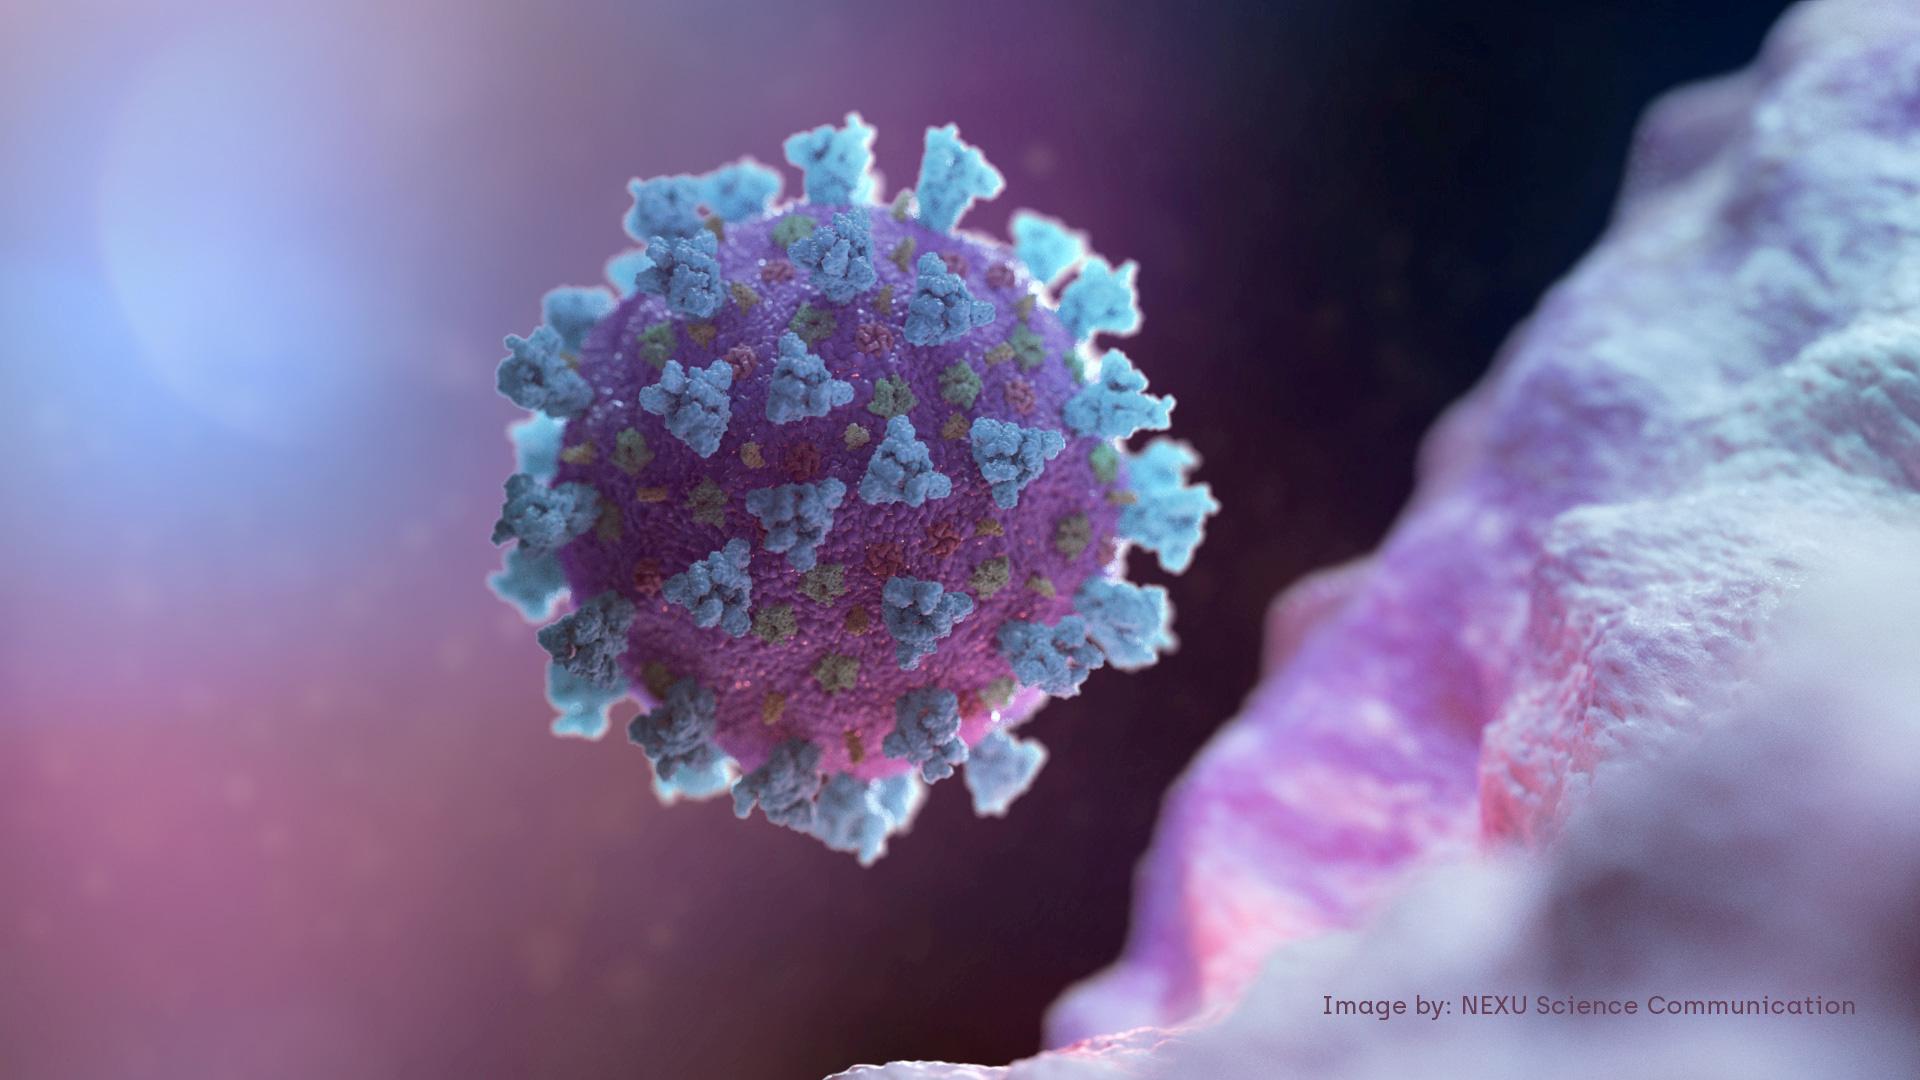 The image is a purple and pink representation of the globular virus. 